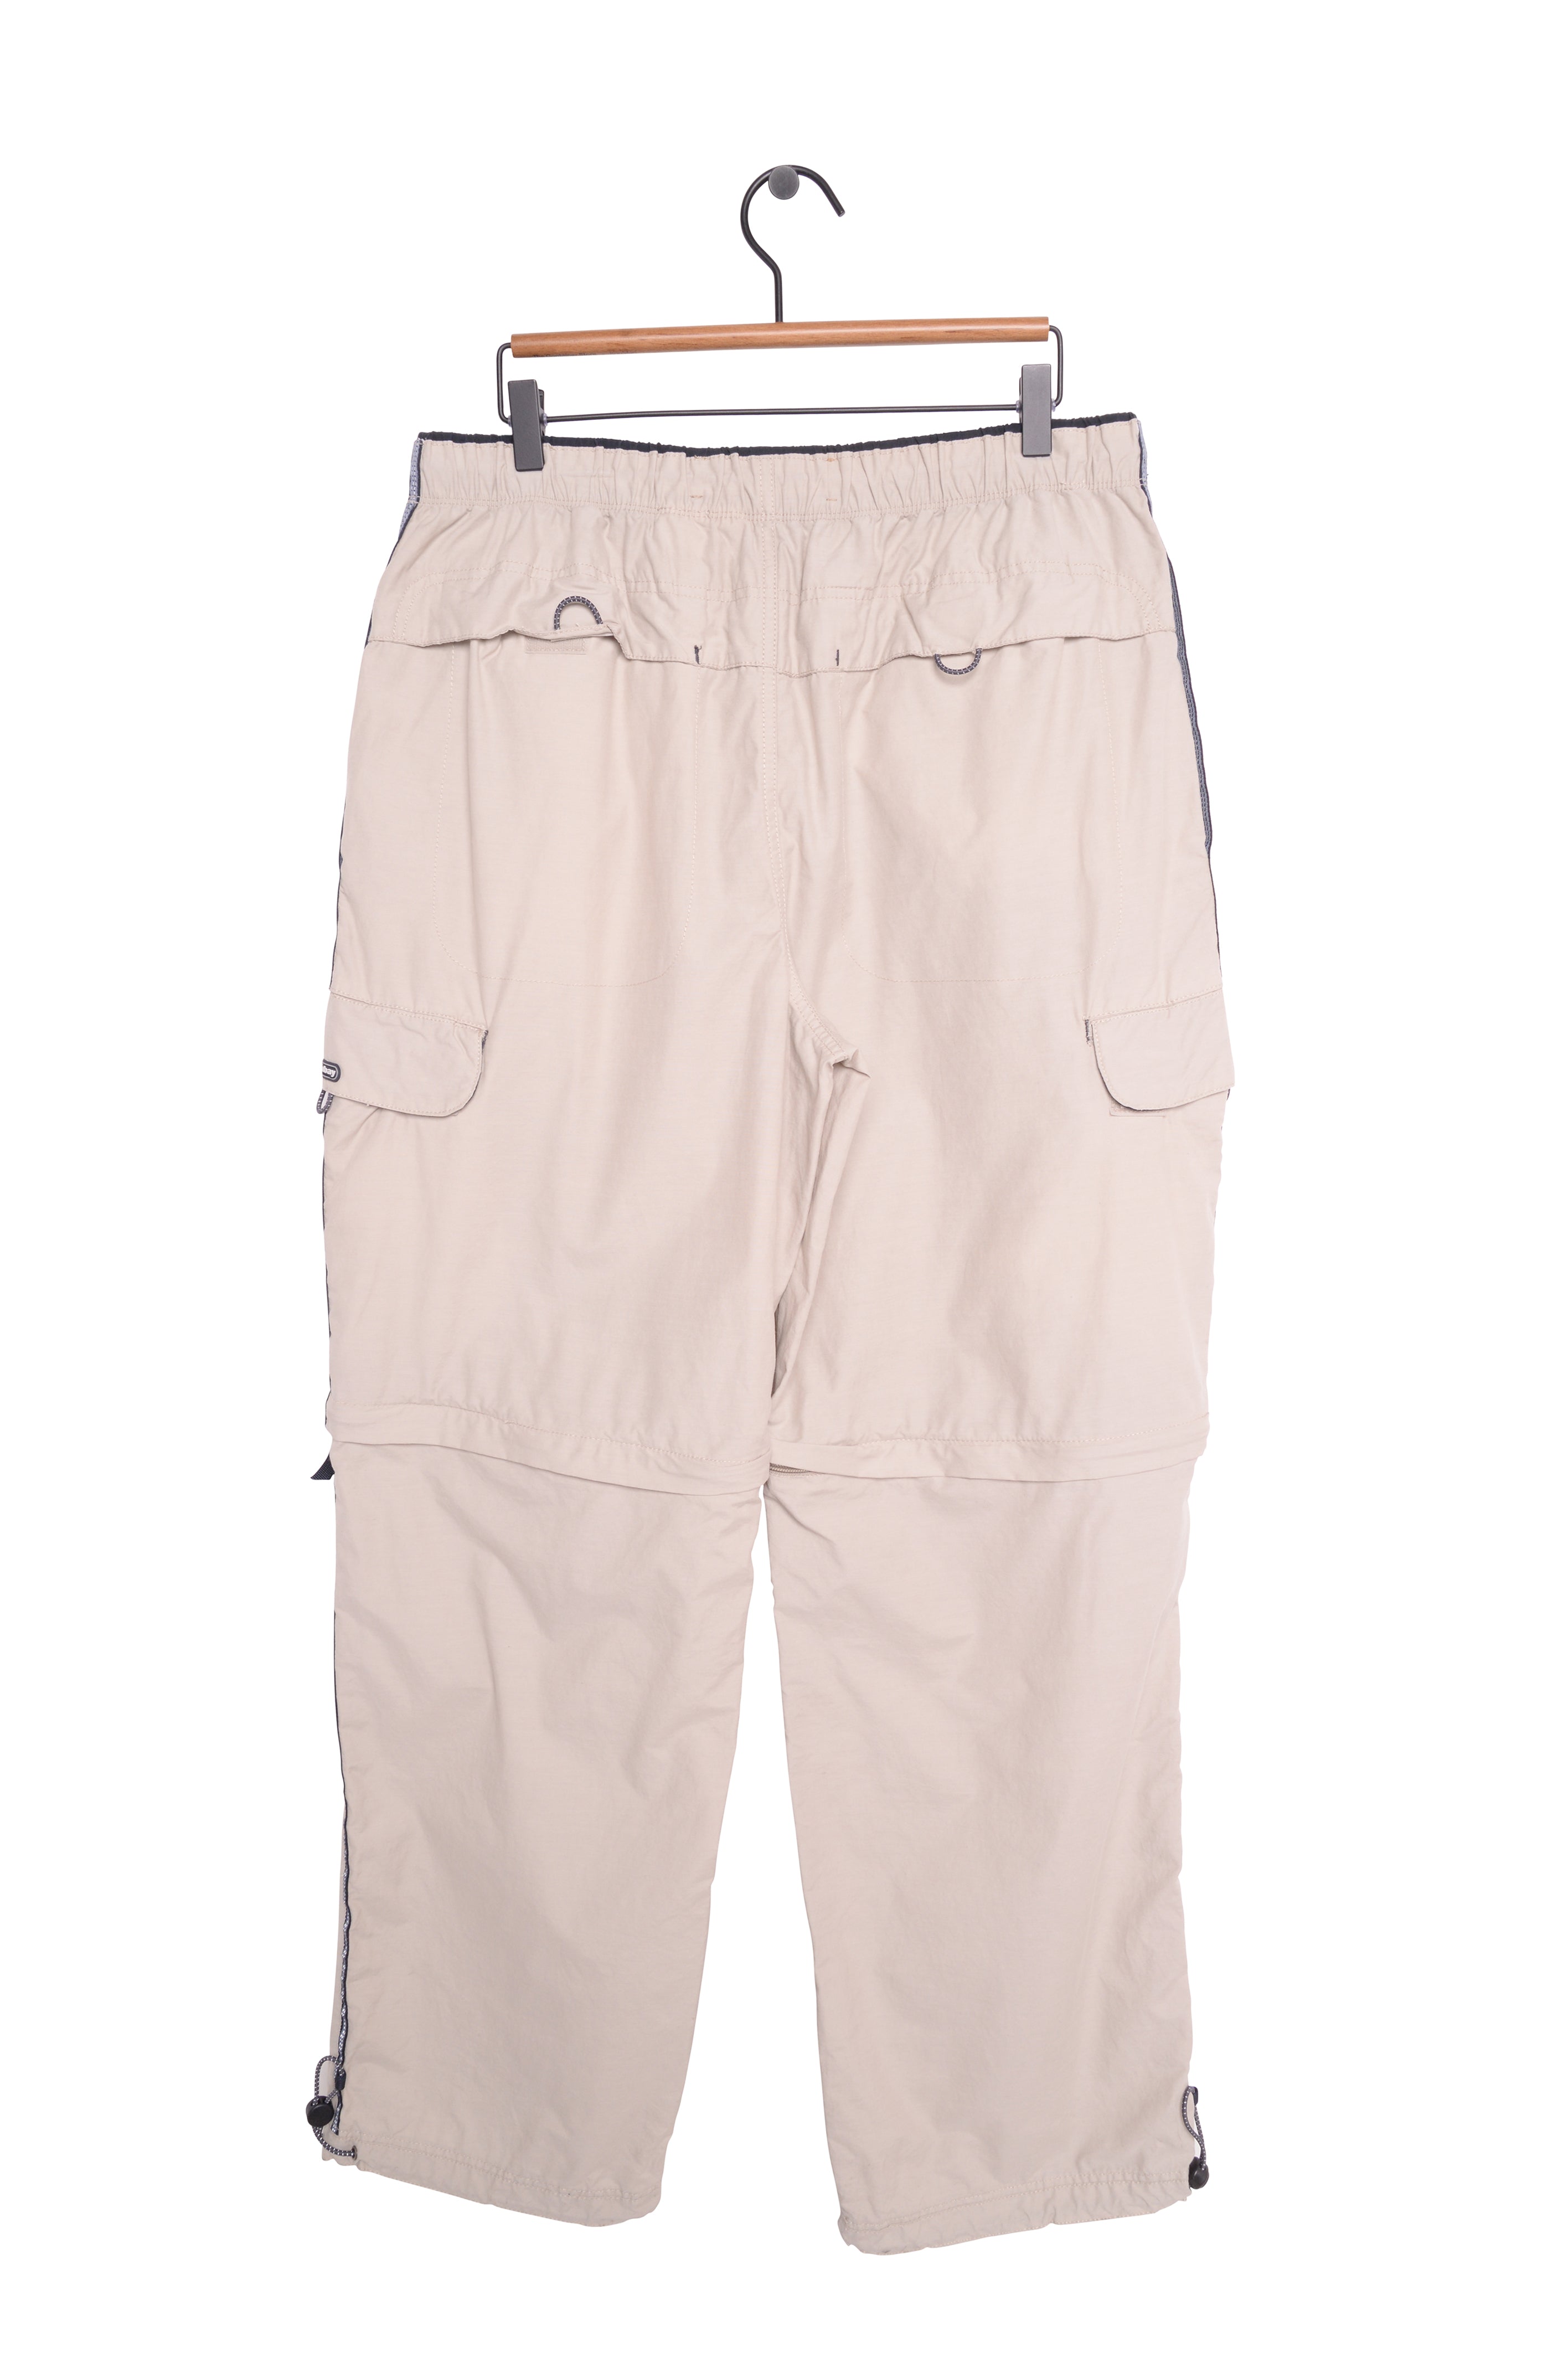 Relaxed Fit Zip-off cargo trousers - Light grey - Men | H&M IN